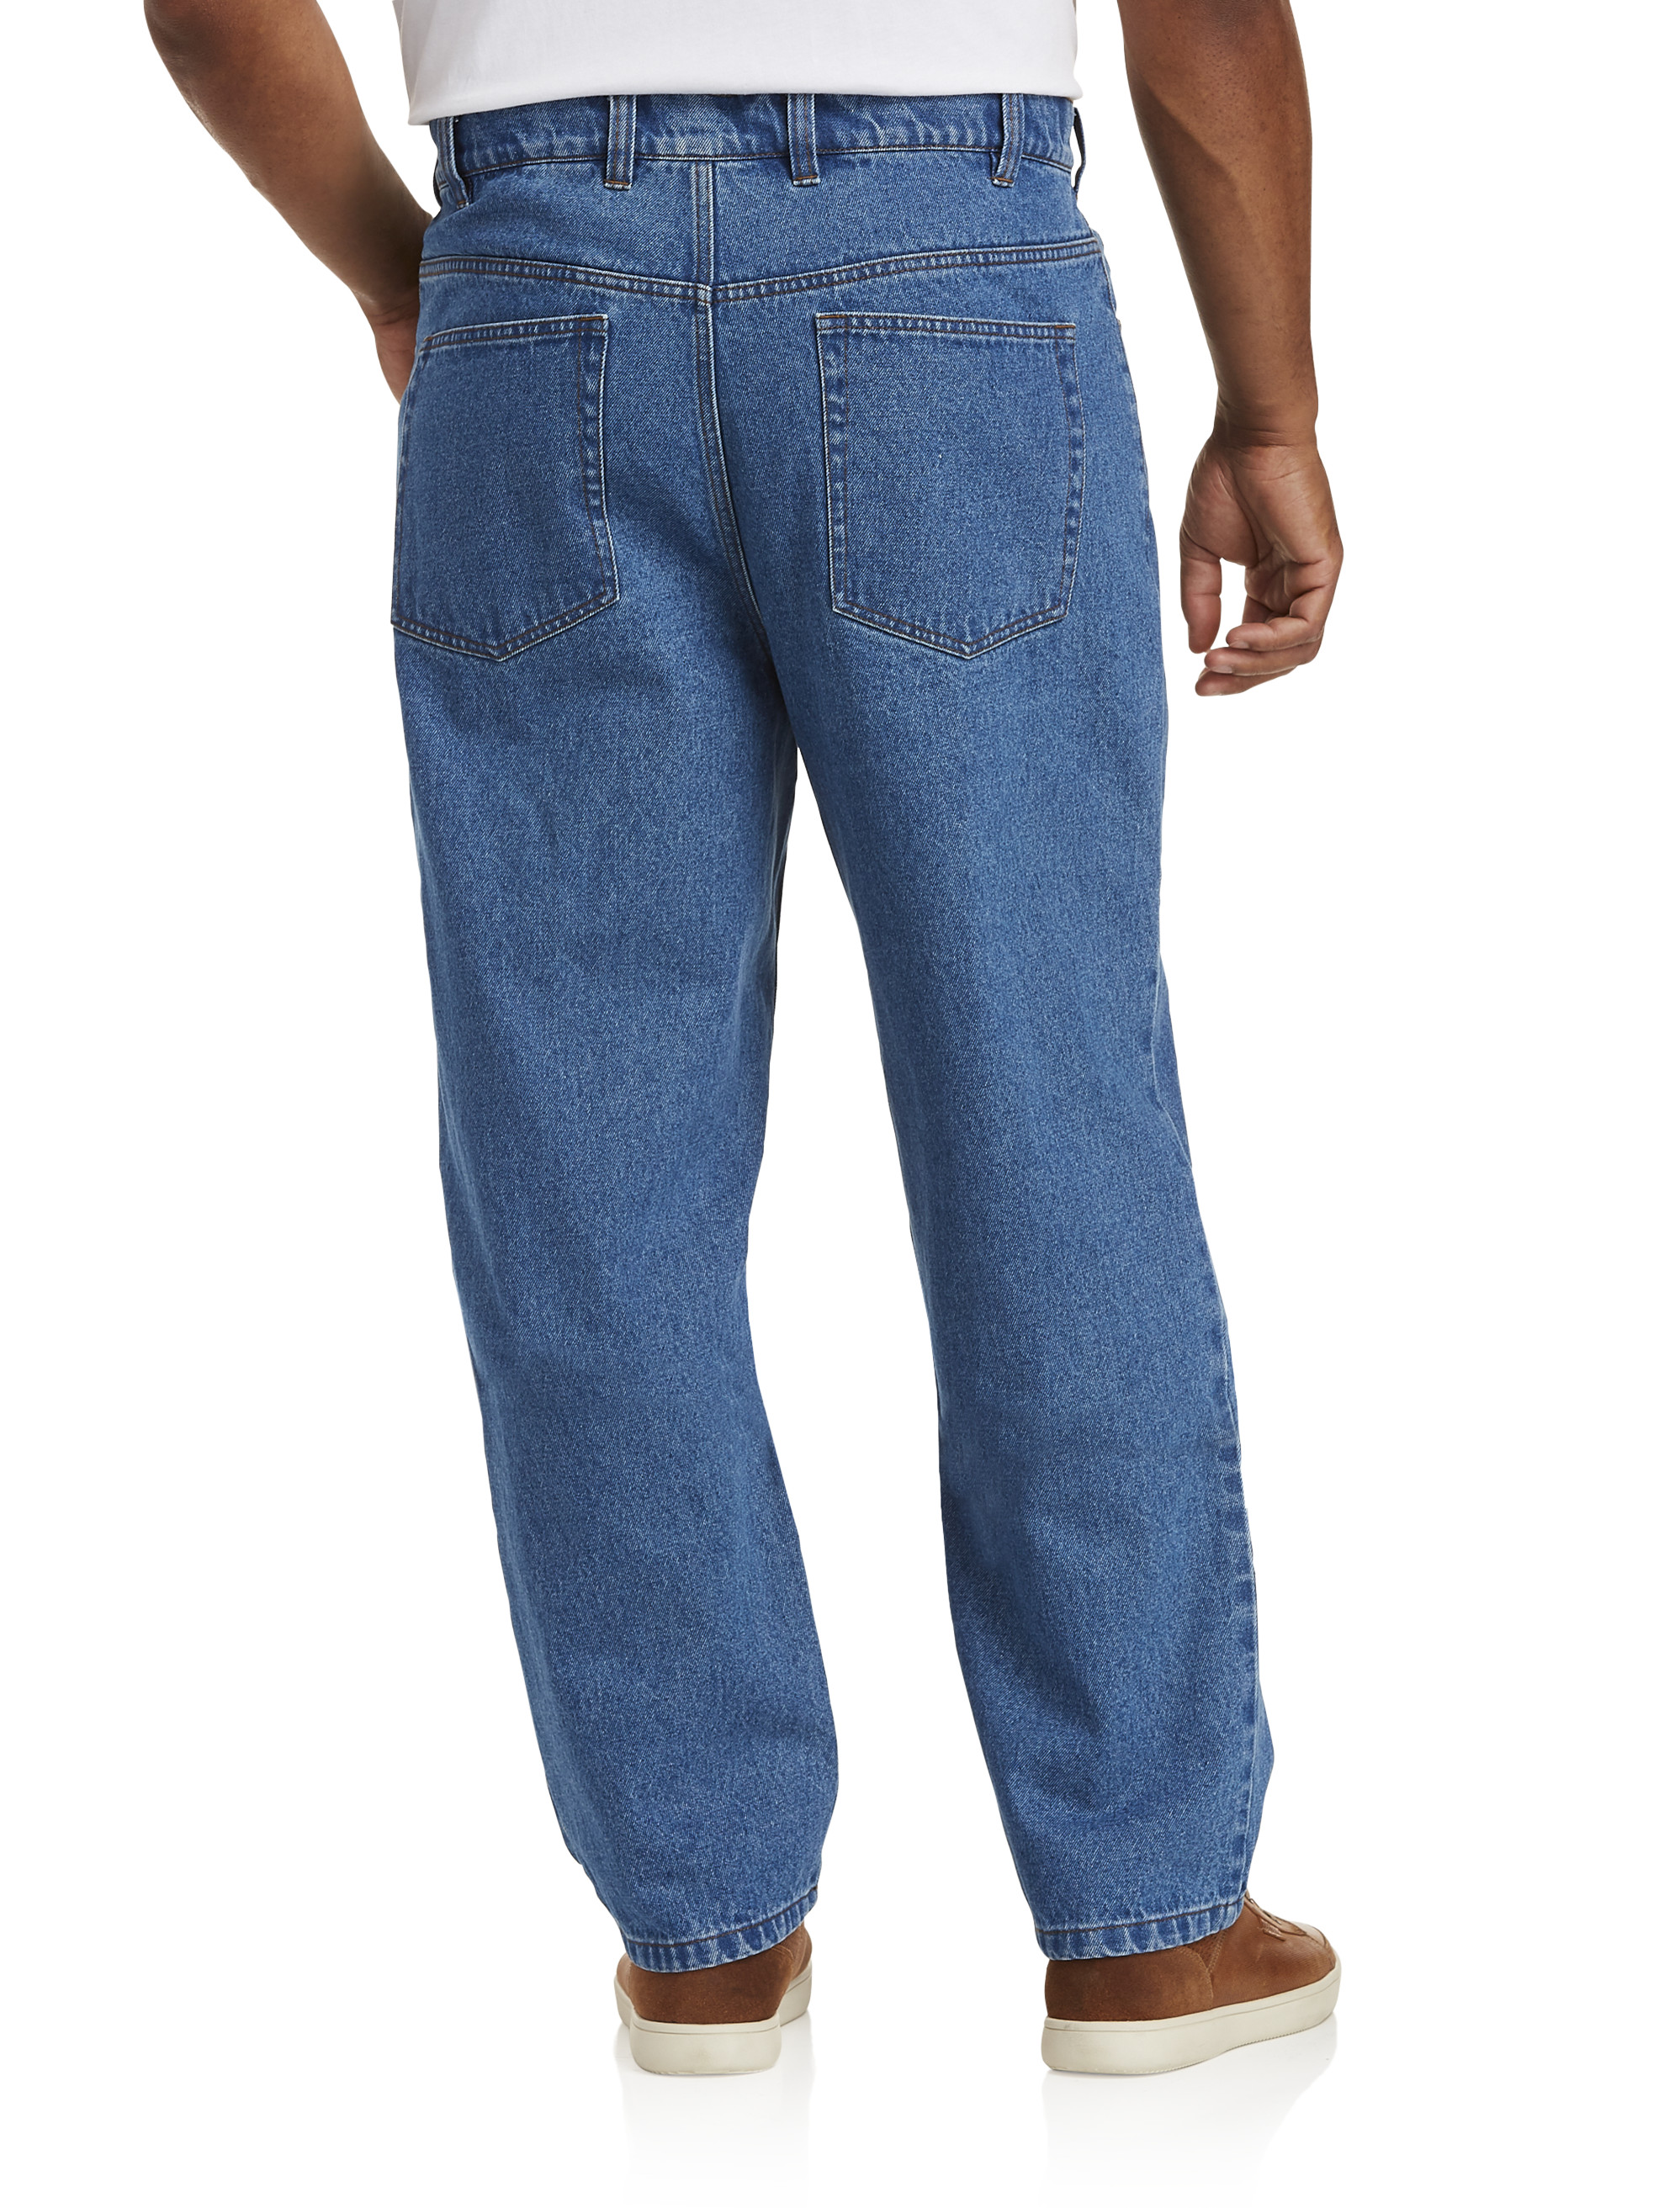 Harbor Bay by DXL Men's Big and Tall Full-Elastic Waist Jeans